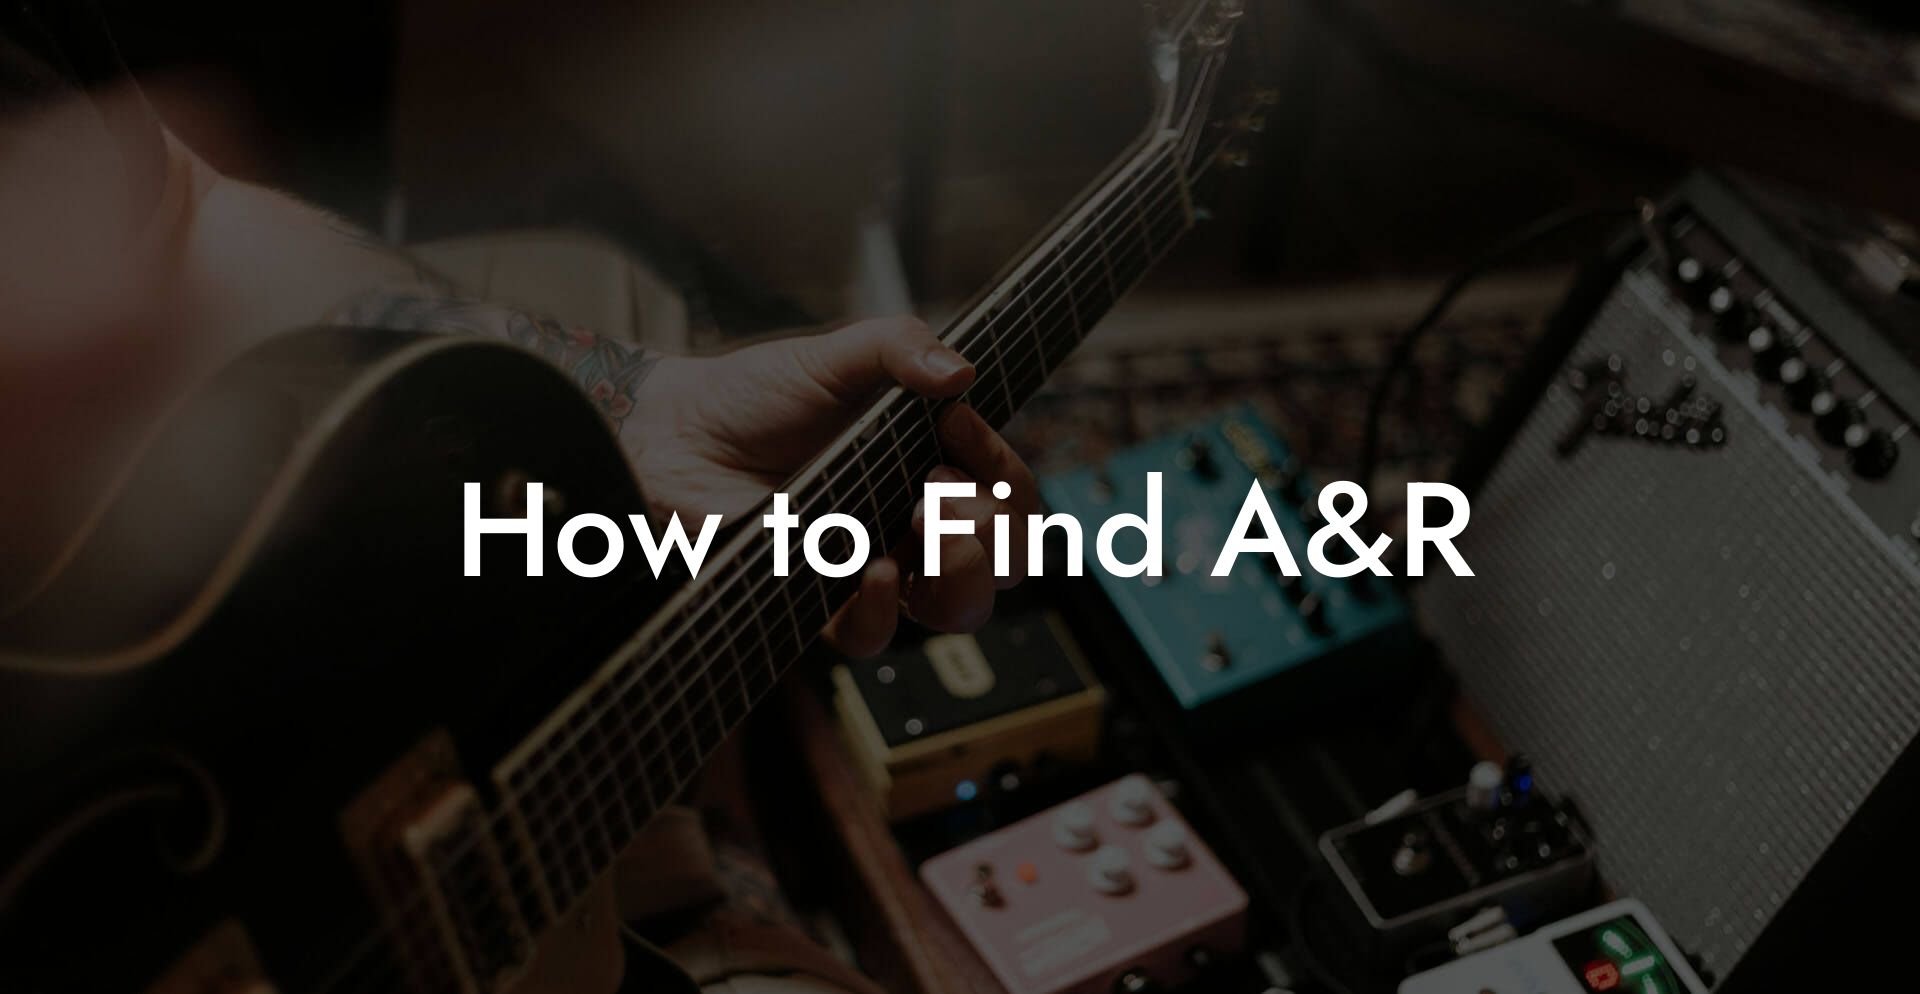 How to Find A&R